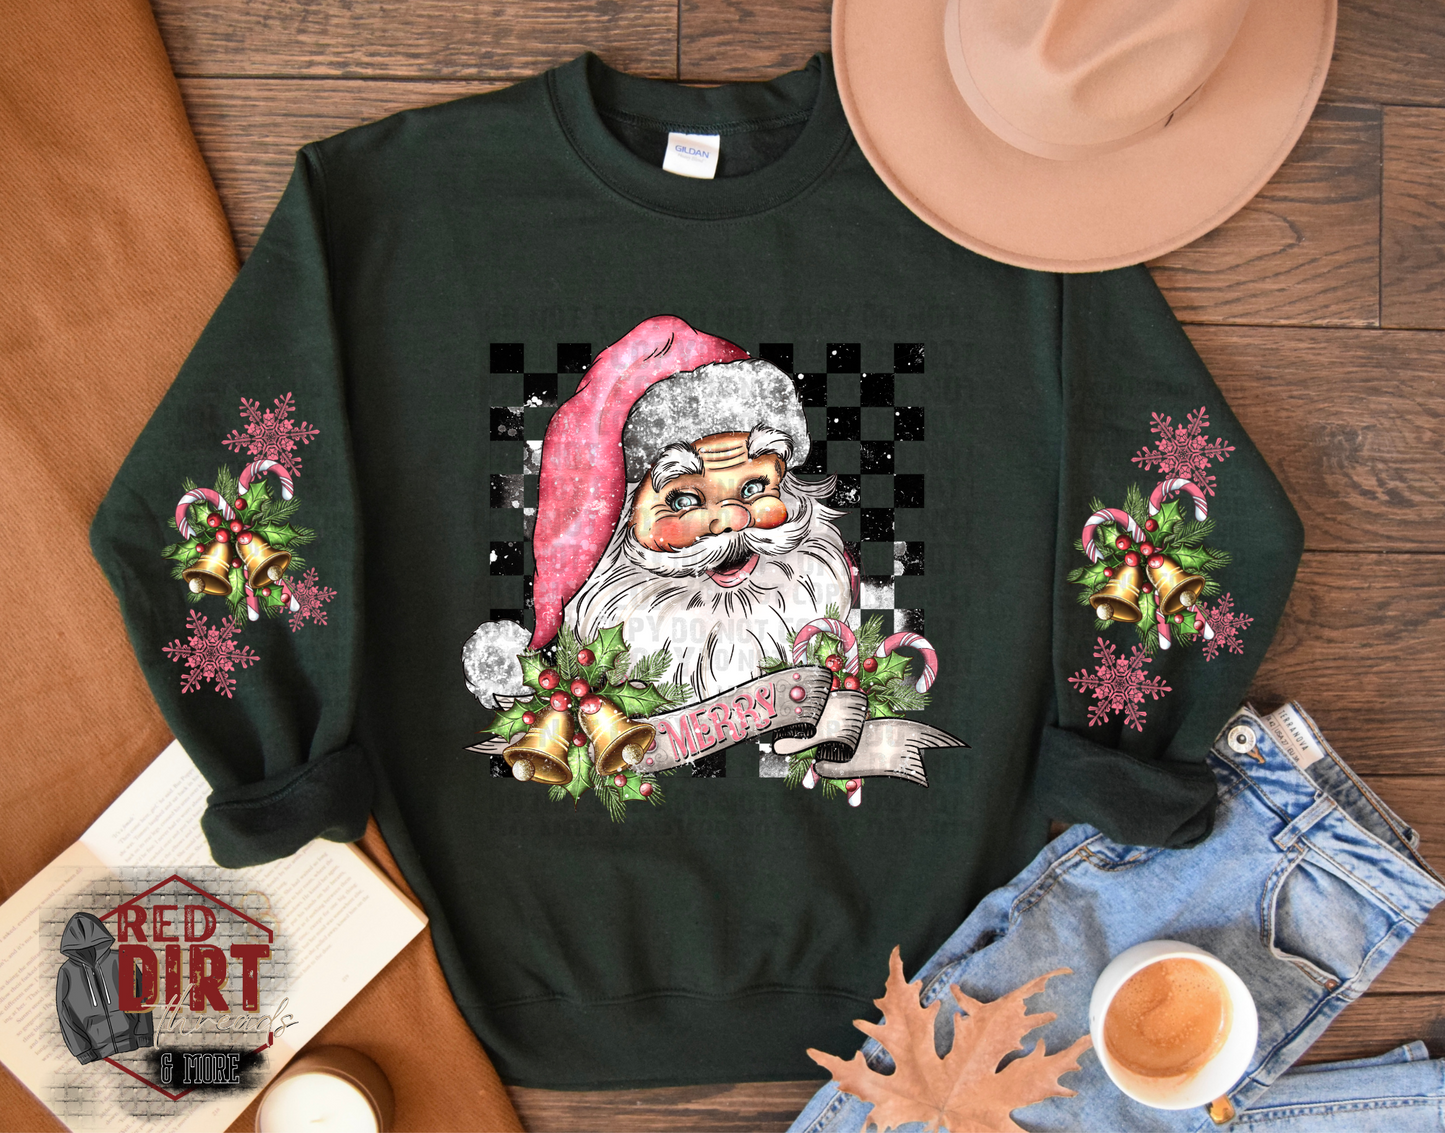 Vintage Pink Santa Sweat Shirt | Trendy Christmas Hoodie with Sleeves | Fast Shipping | Super Soft Shirts for Women